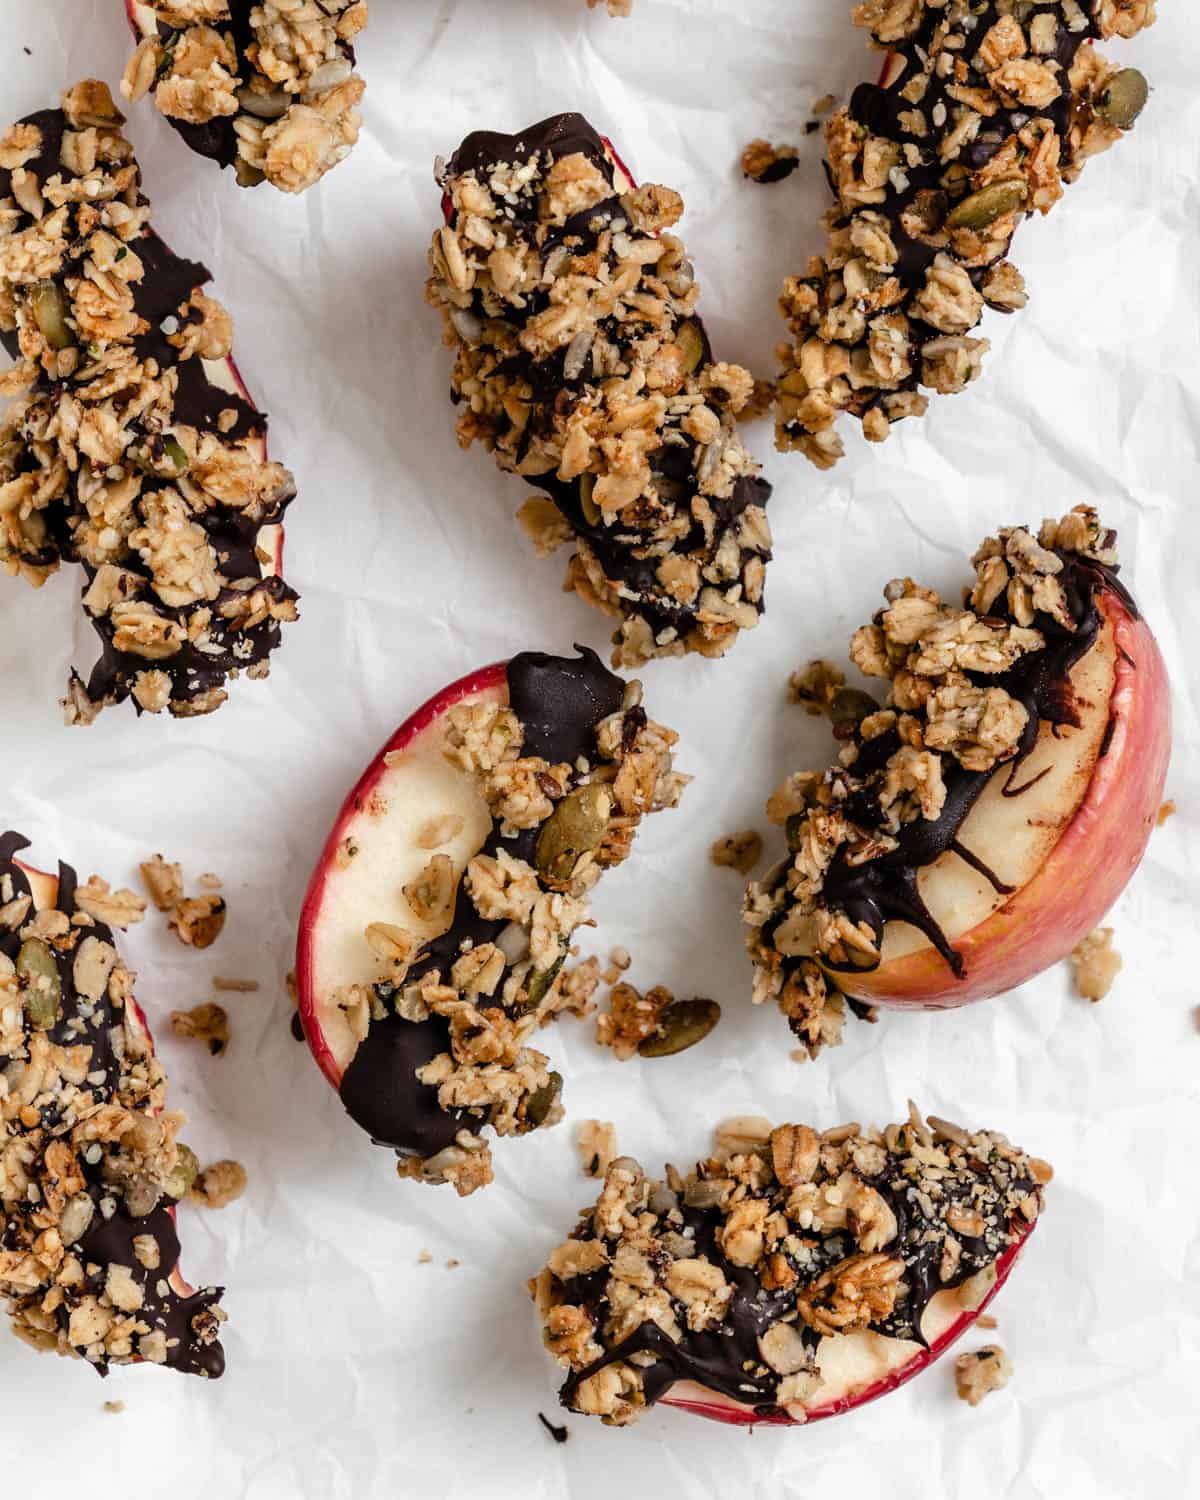 several completed Healthy Apple Snacks with Granola against a white surface